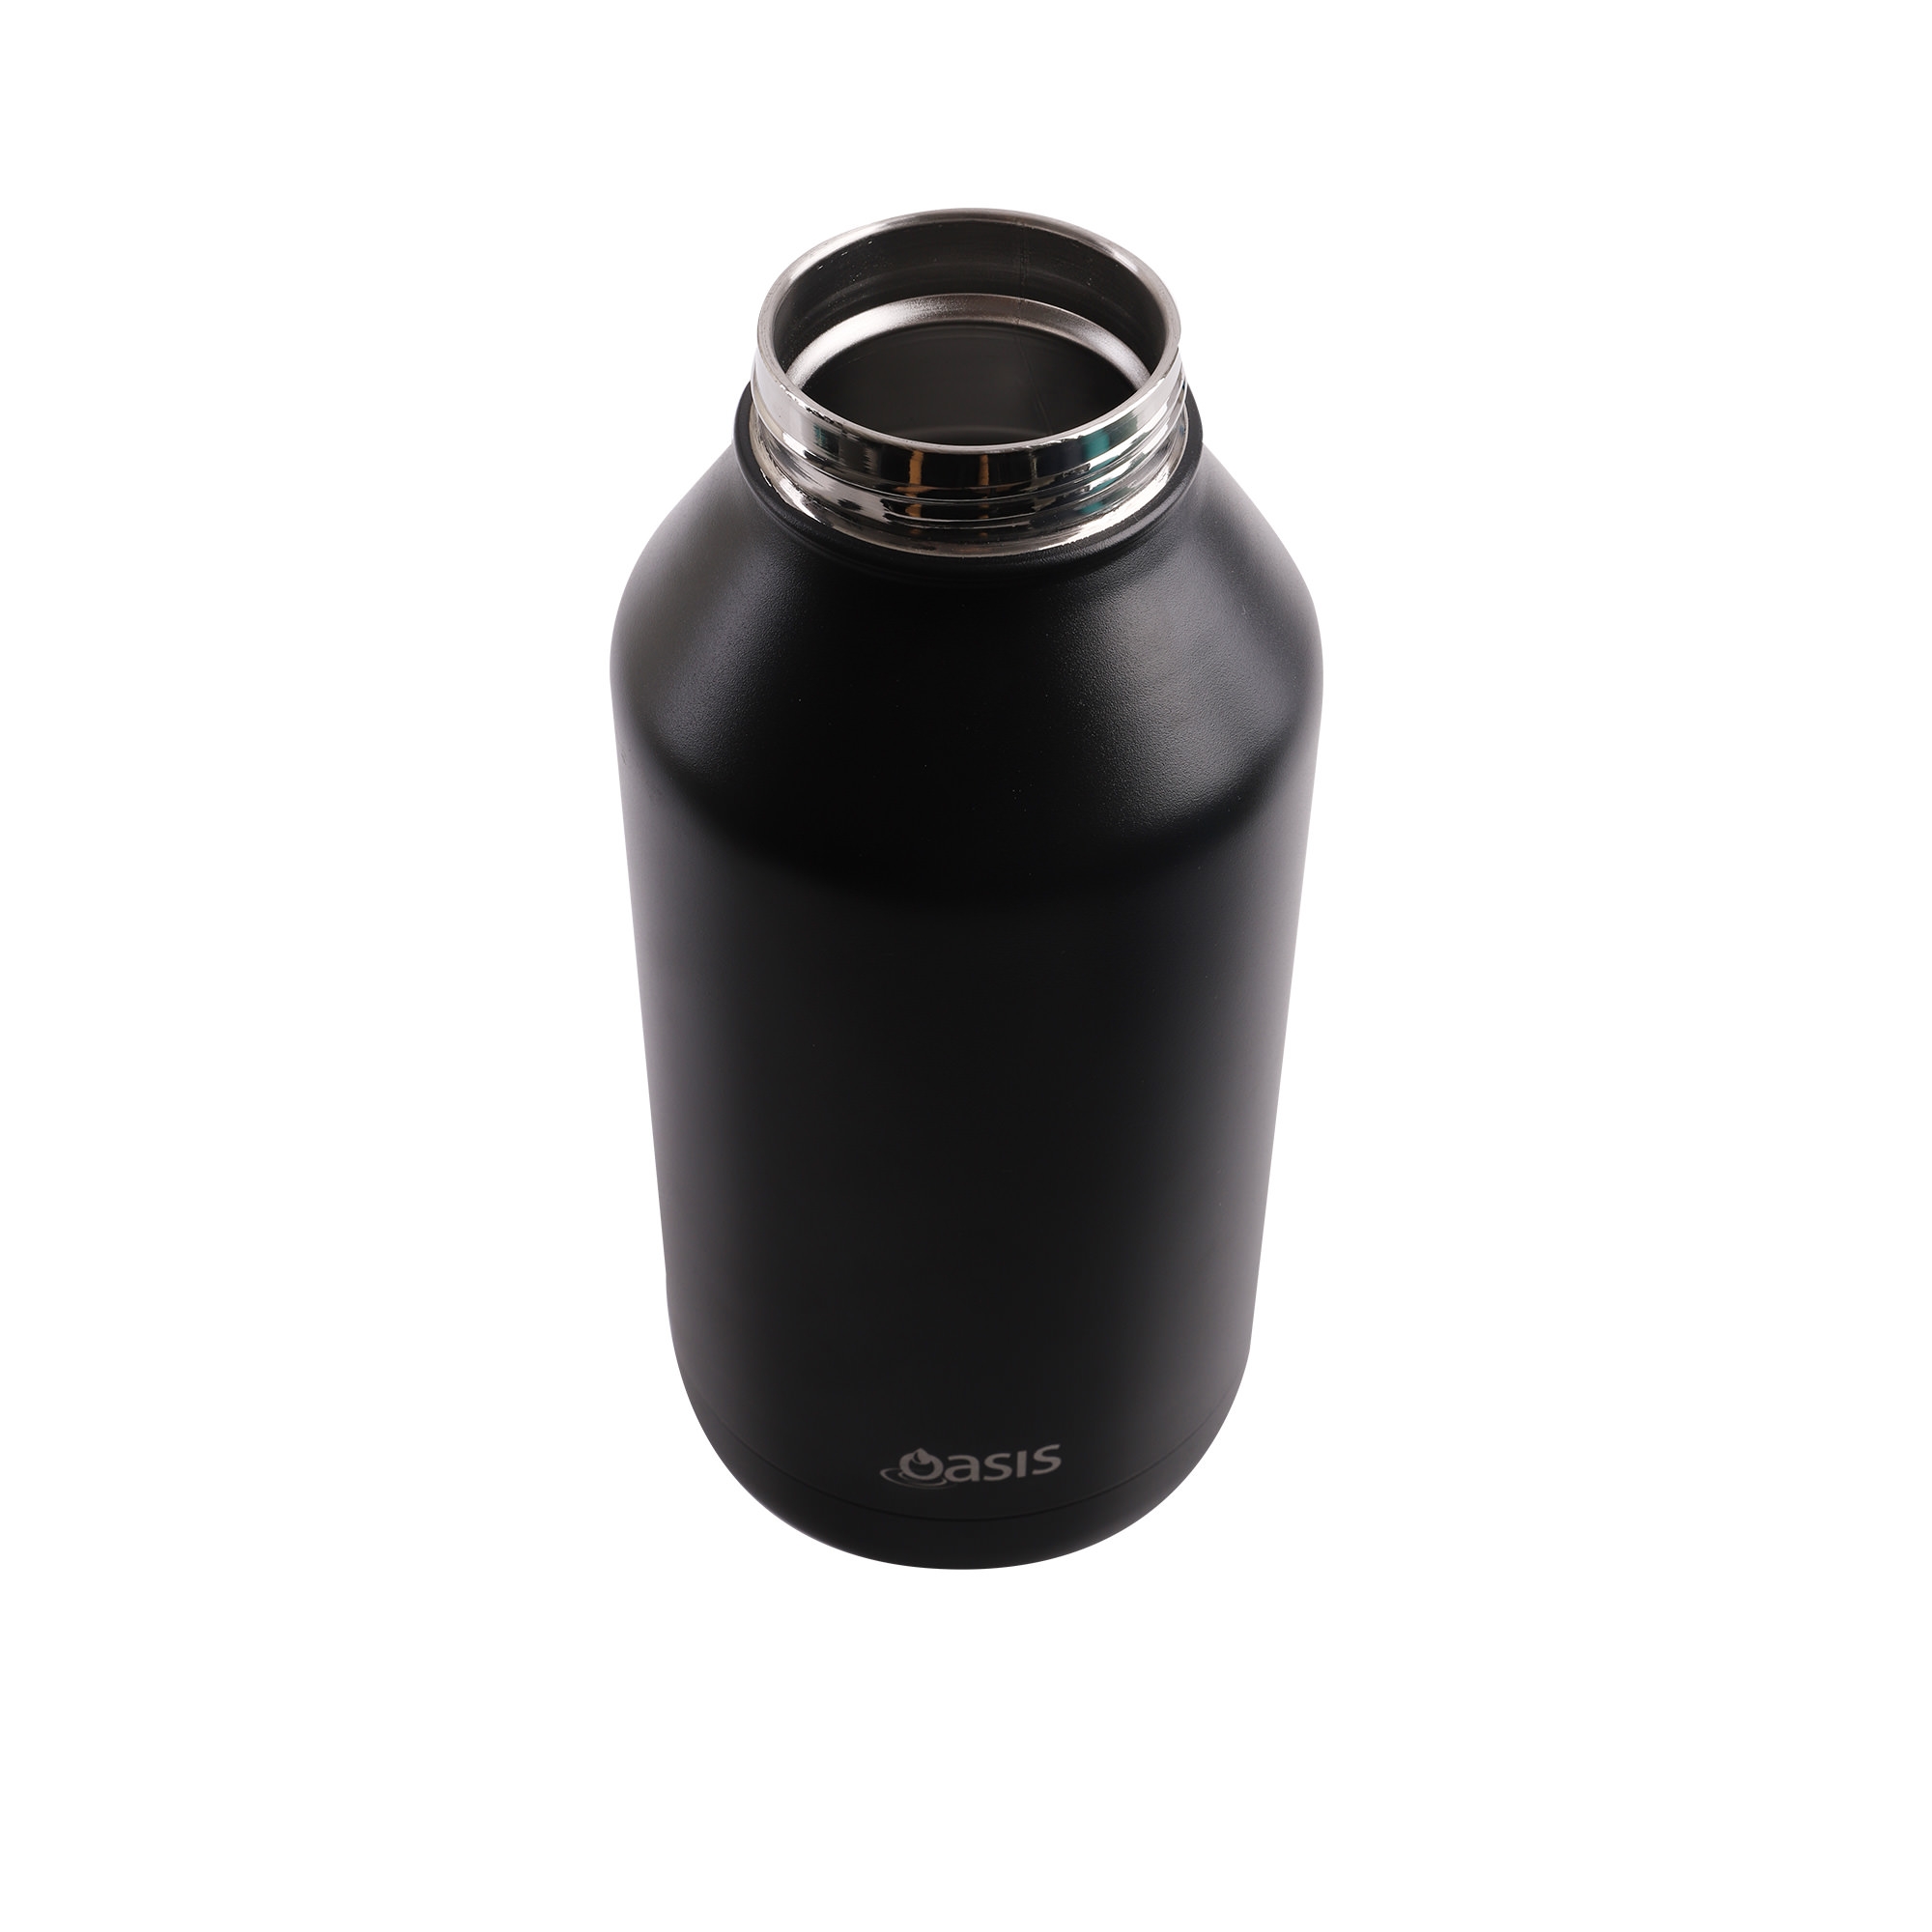 Oasis Double Wall Insulated Titan Drink Bottle 1.9L Black Image 2